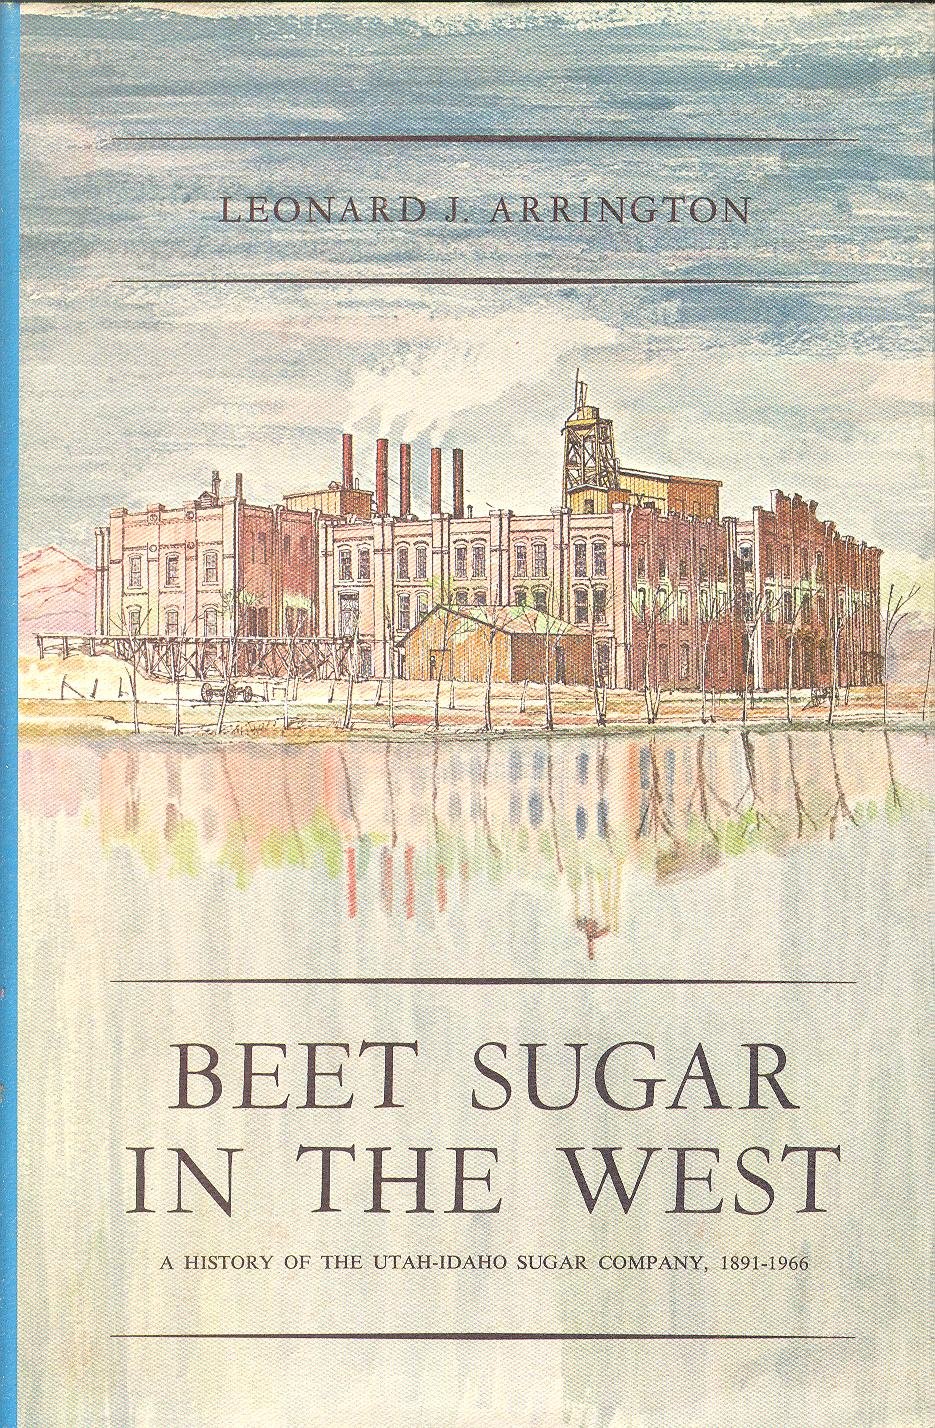 Beet sugar in the West: A history of the Utah-Idaho Sugar Company, 1891-1966 (book cover)